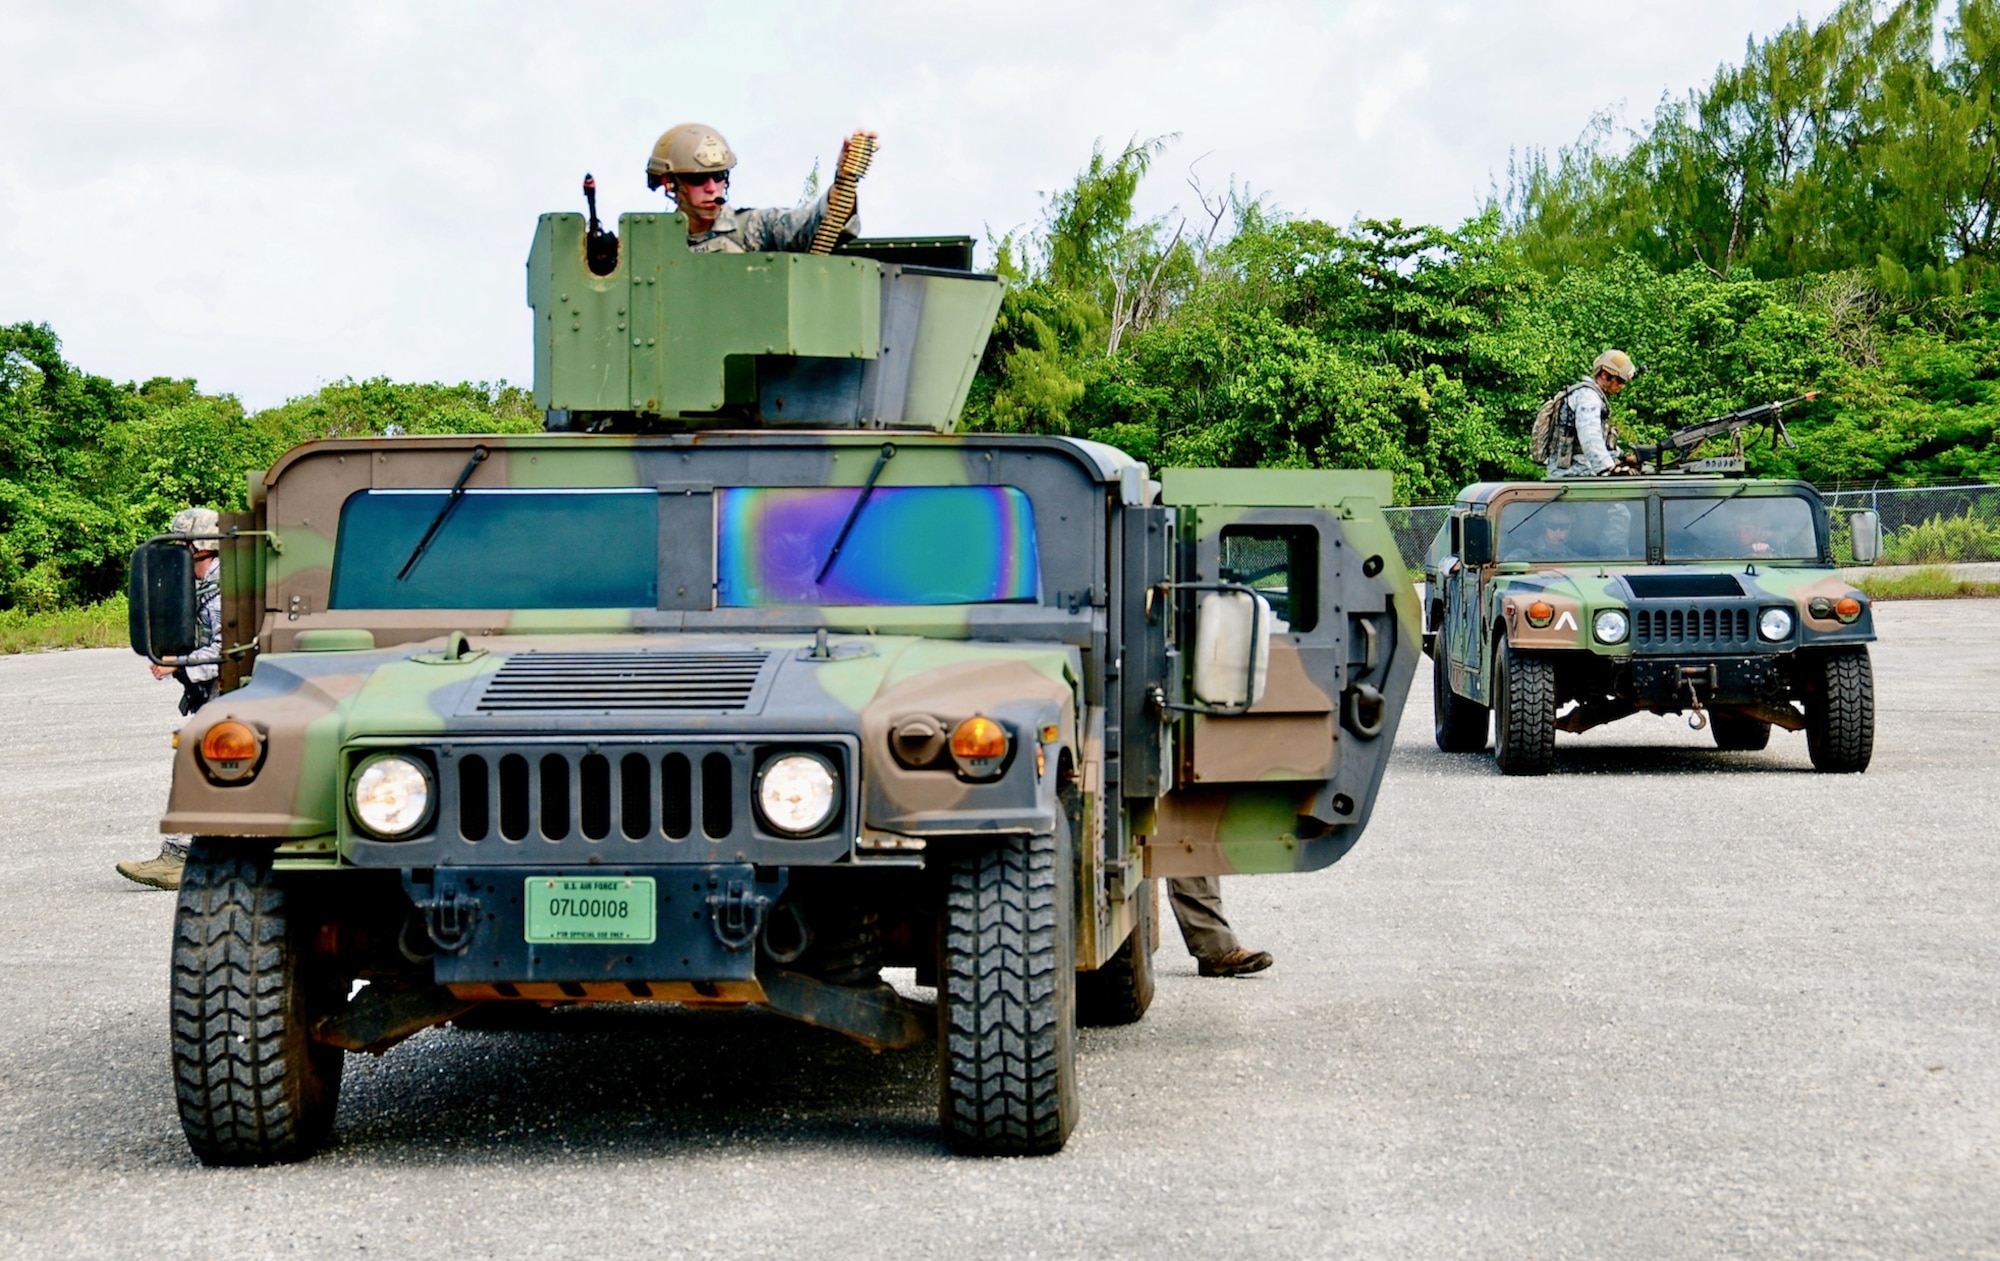 The 736th Security Forces Squadron Airmen prepare their high mobility multipurpose wheeled vehicle for a patrol during an exercise at Northwest field, Guam, June 6. The 36 CRG conducted a four-day exercise in order to hone their tactical skills, improve operational readiness and prepare for an upcoming unit compliance inspection. (U.S. Air Force photo by Airman 1st Class Marianique Santos/Released)